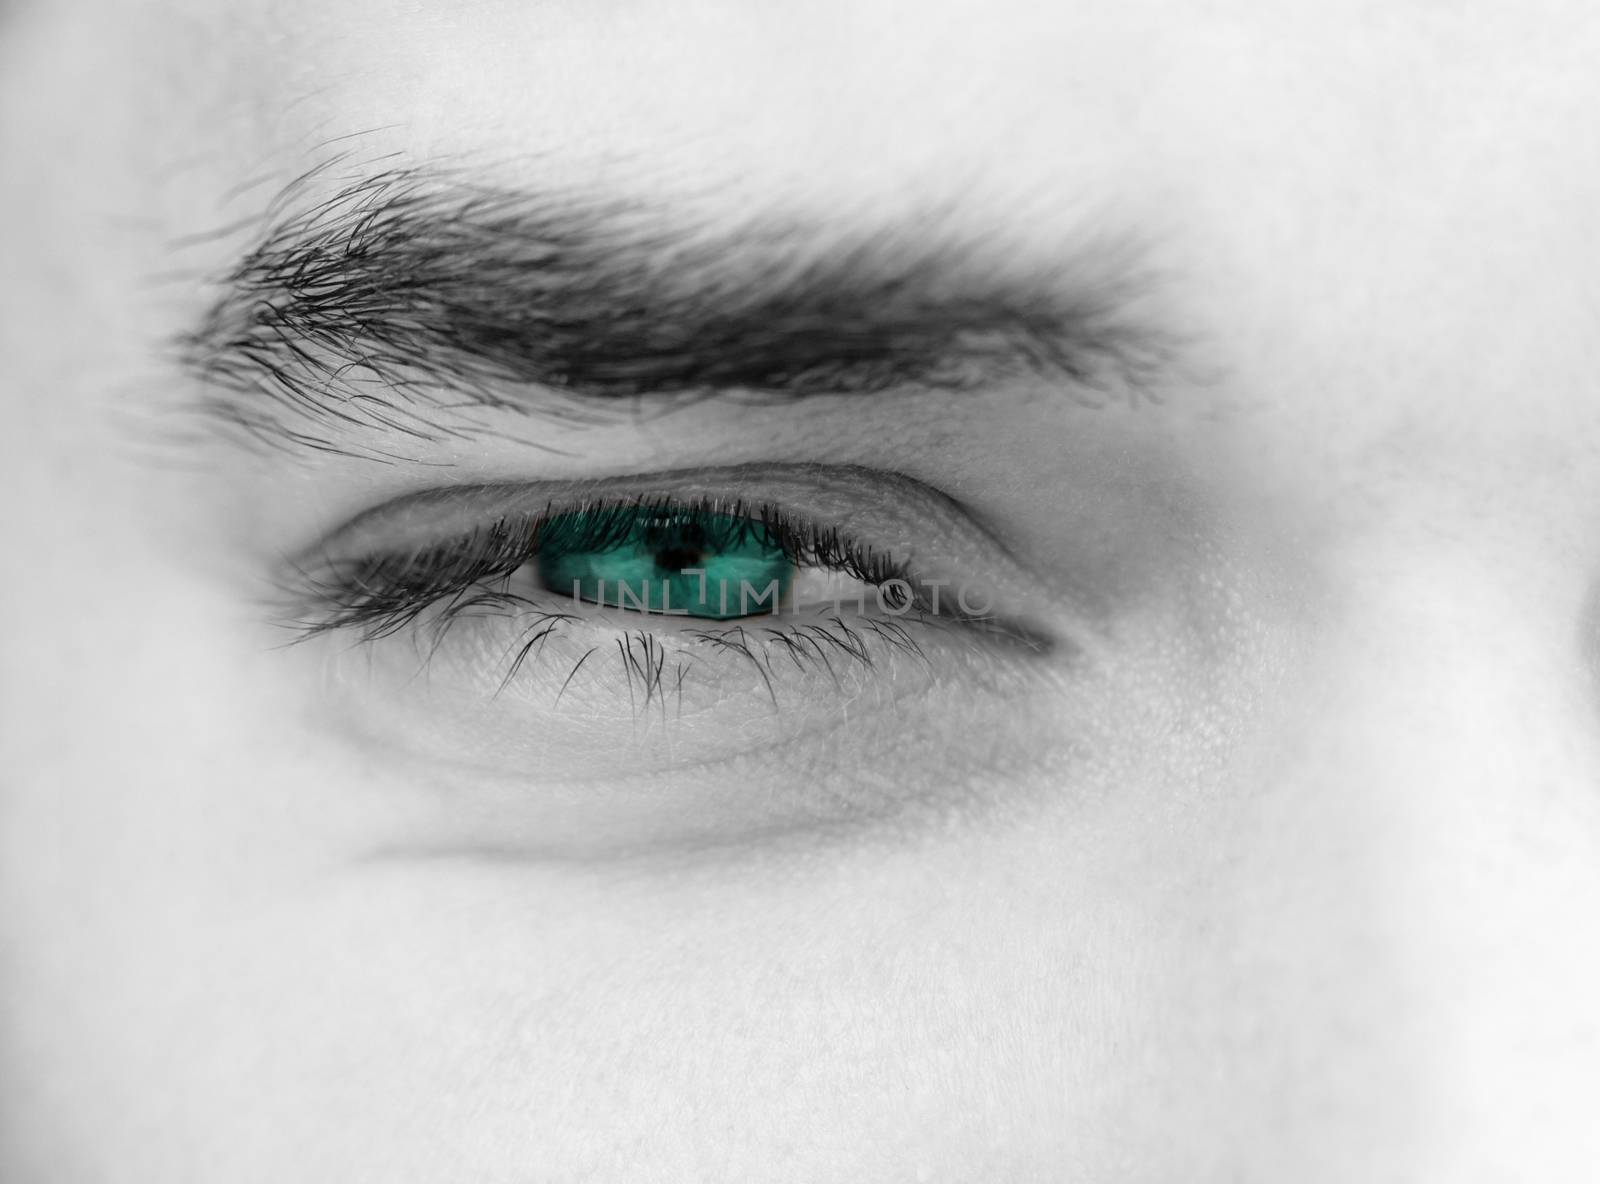 Young man's eyes by Nneirda